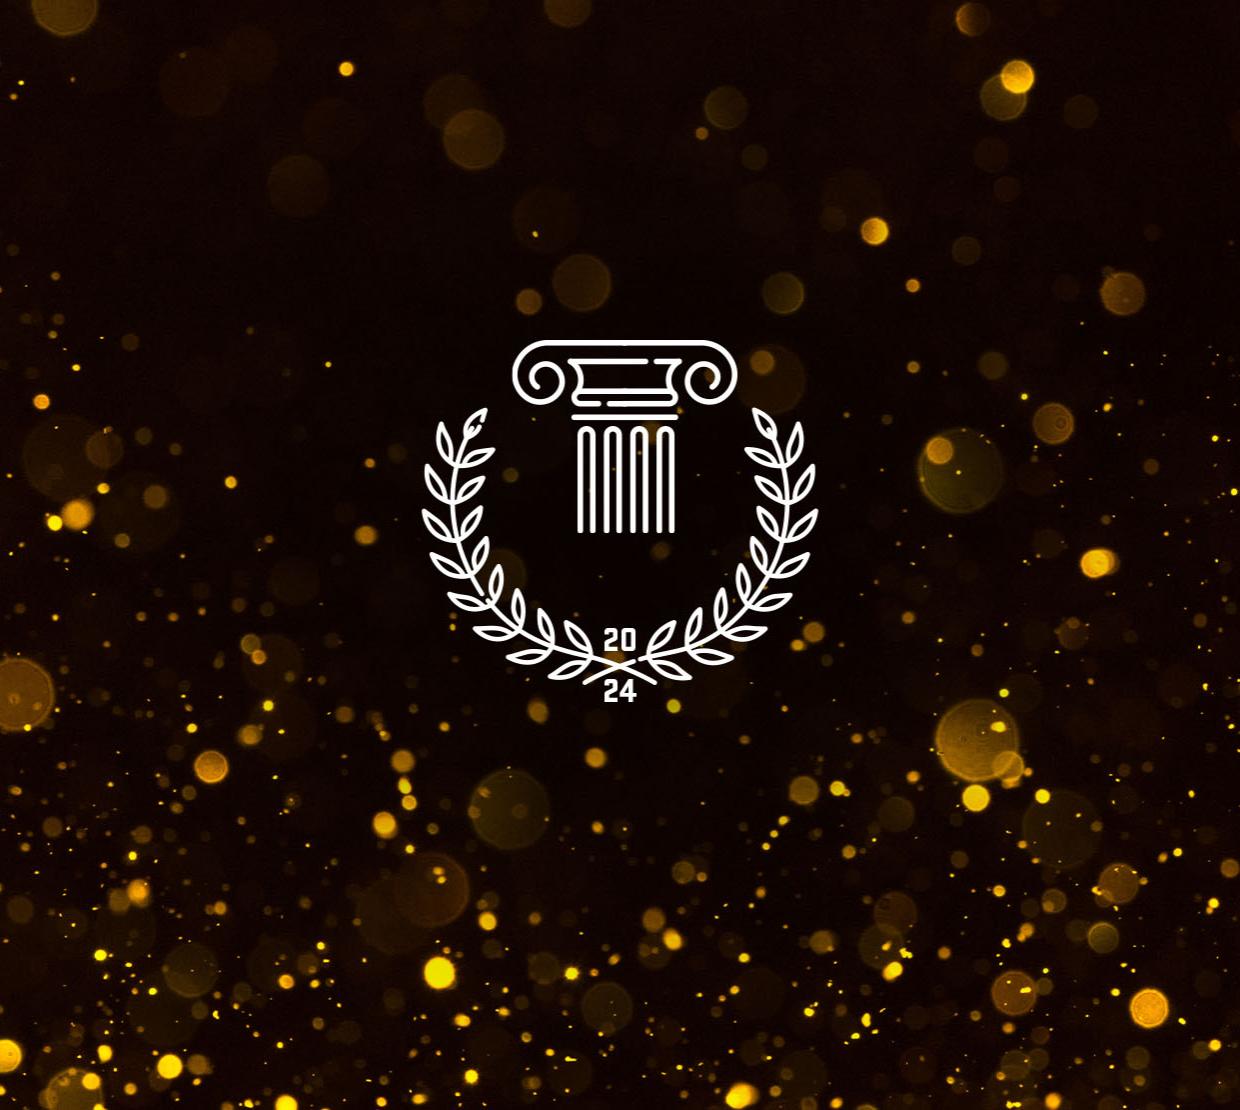 A pillar graphic with golden confetti in the background.